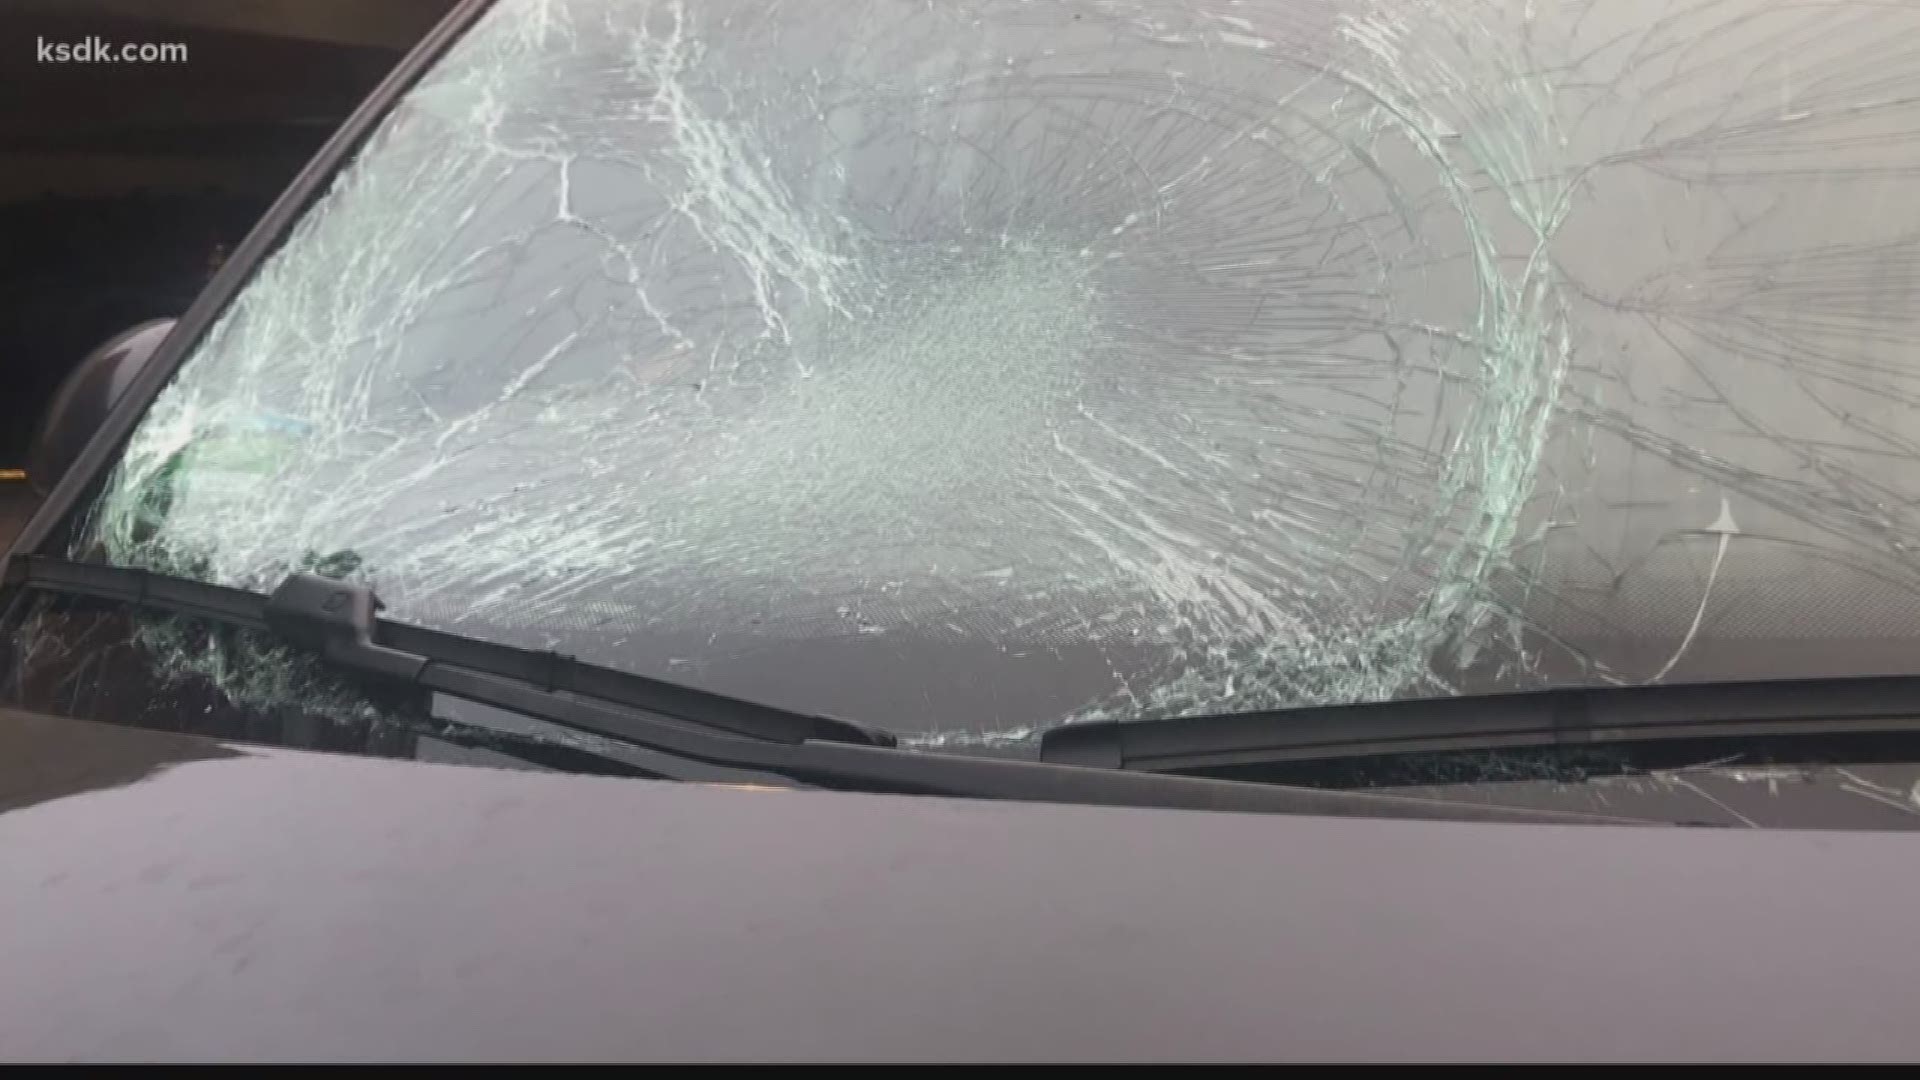 An 'ice mattress' smashed into the windshield of Jenn Sullivan's car. She shared her first-hand experience and offered a warning for drivers on what to expect if this happens to them.